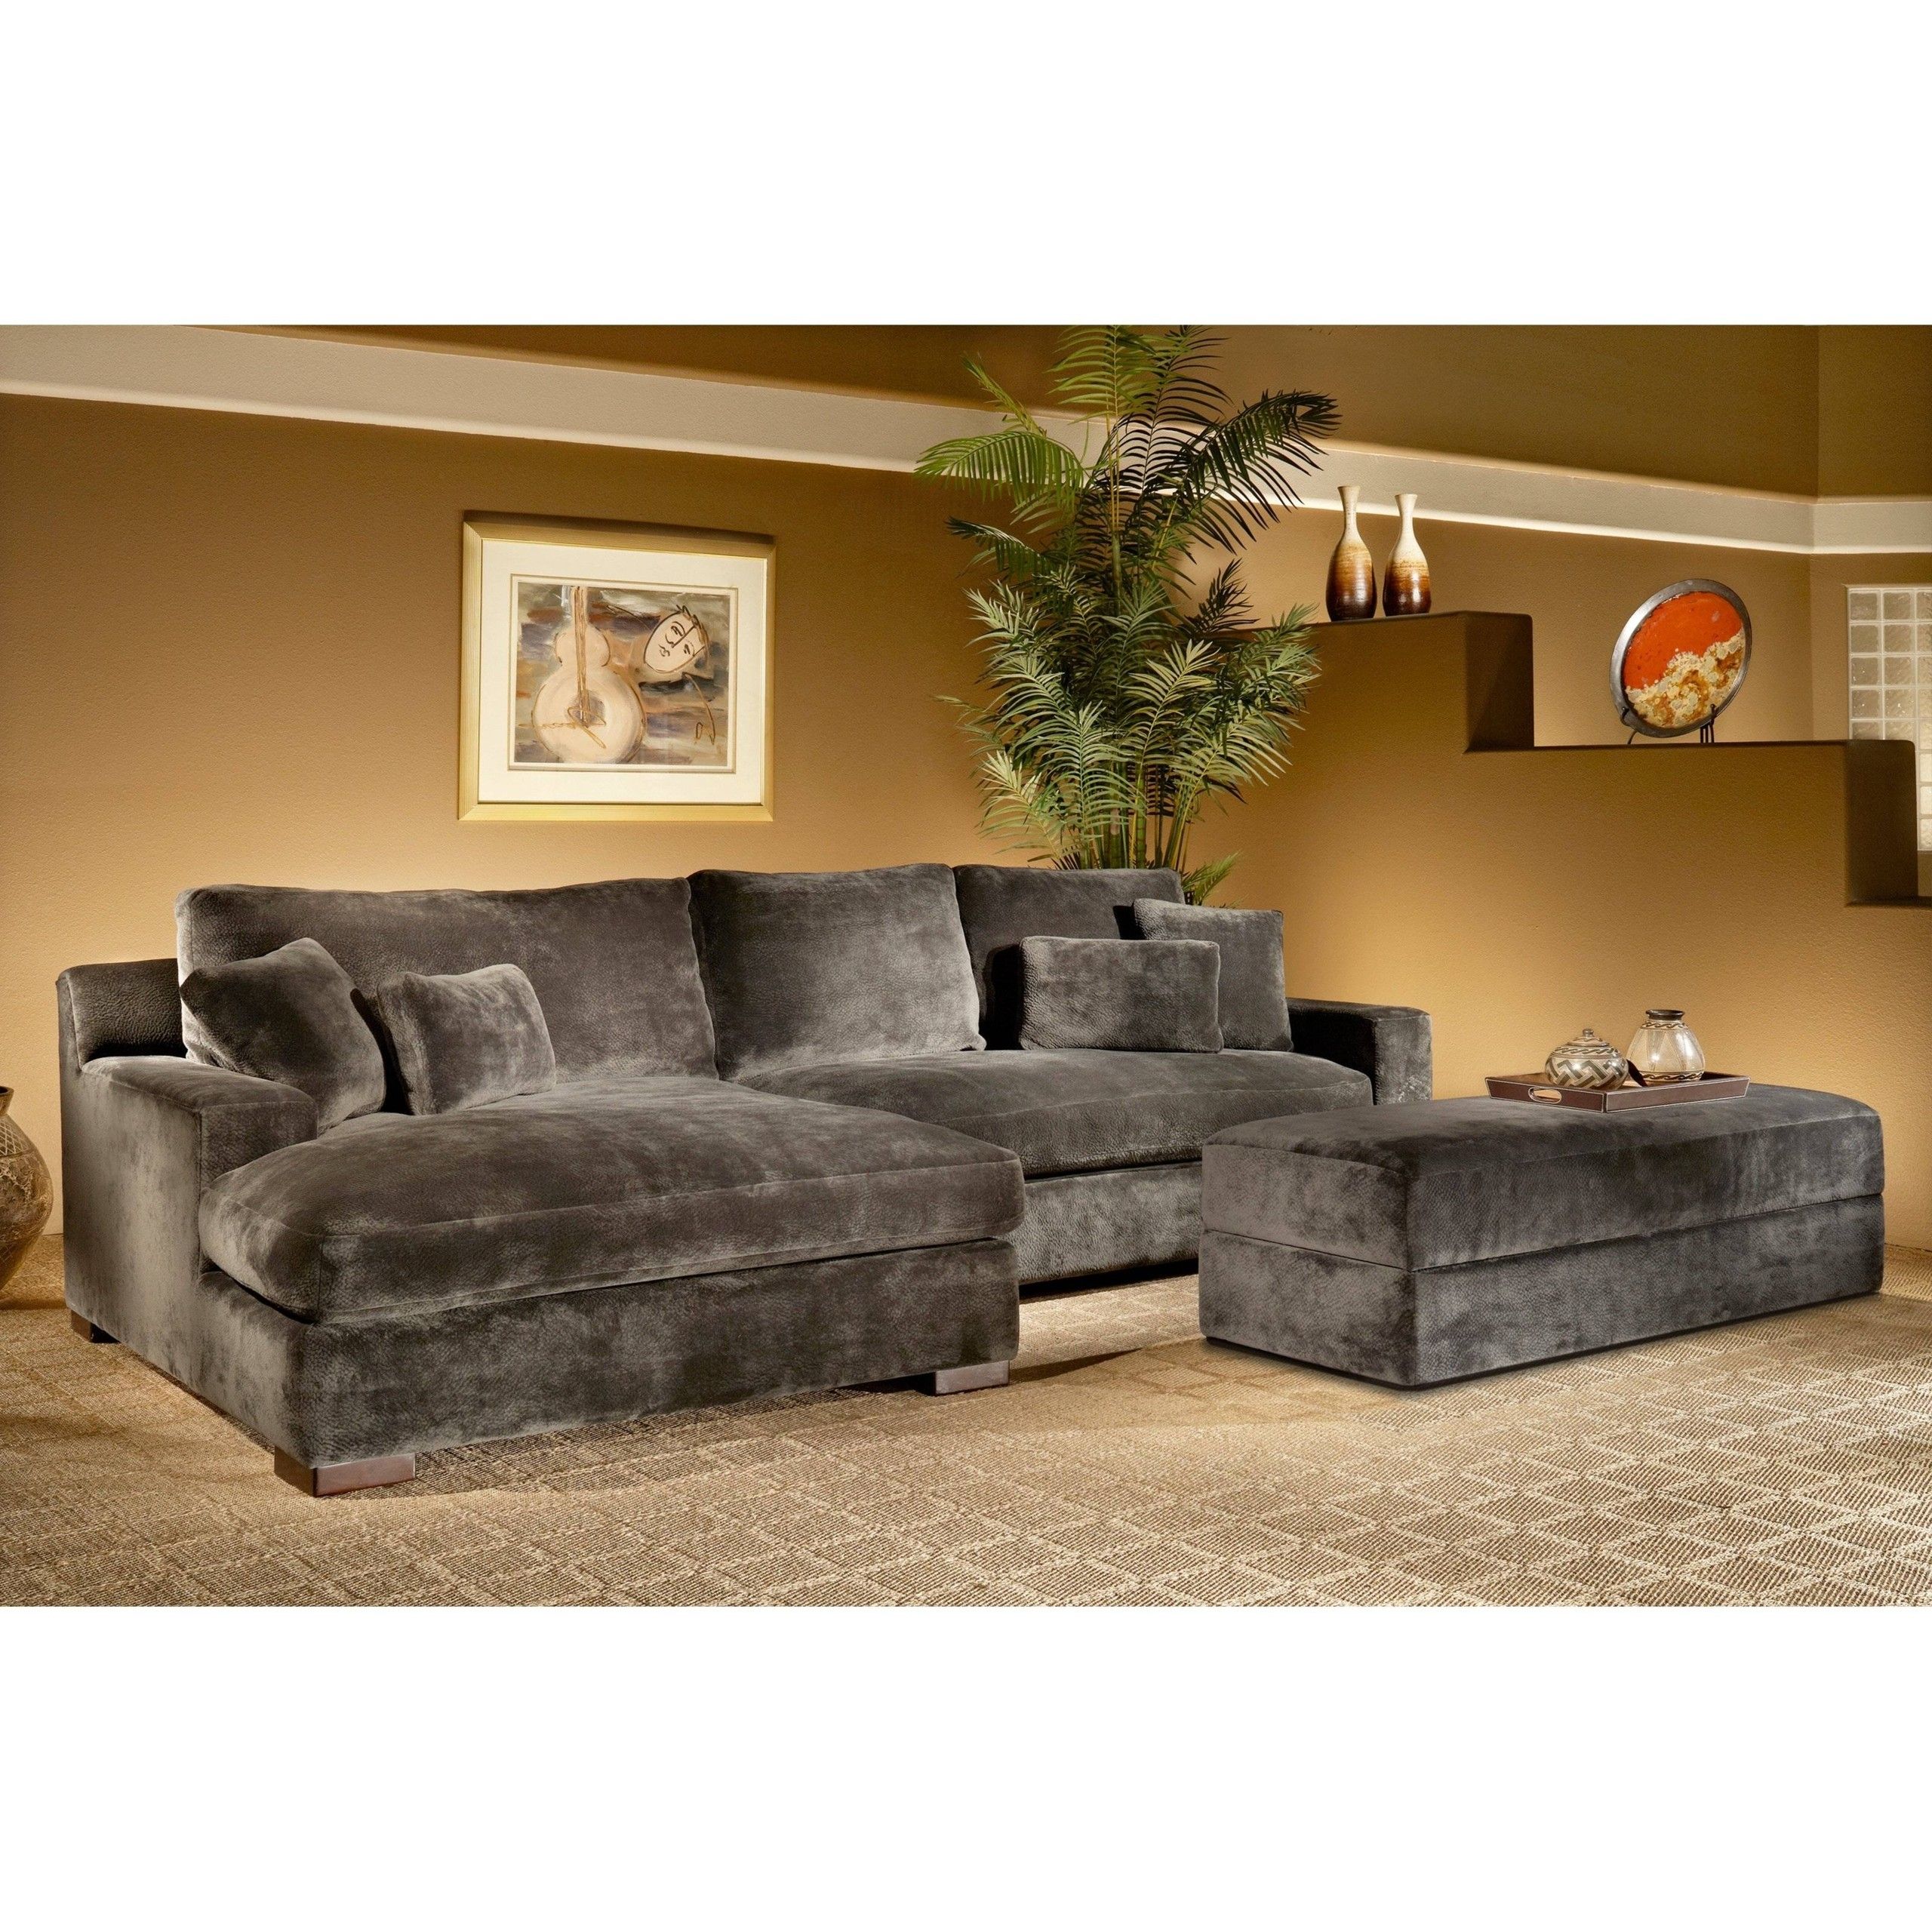 Sectional Sofas With Storage – Ideas On Foter Throughout Sofas With Storage Ottoman (View 18 of 20)